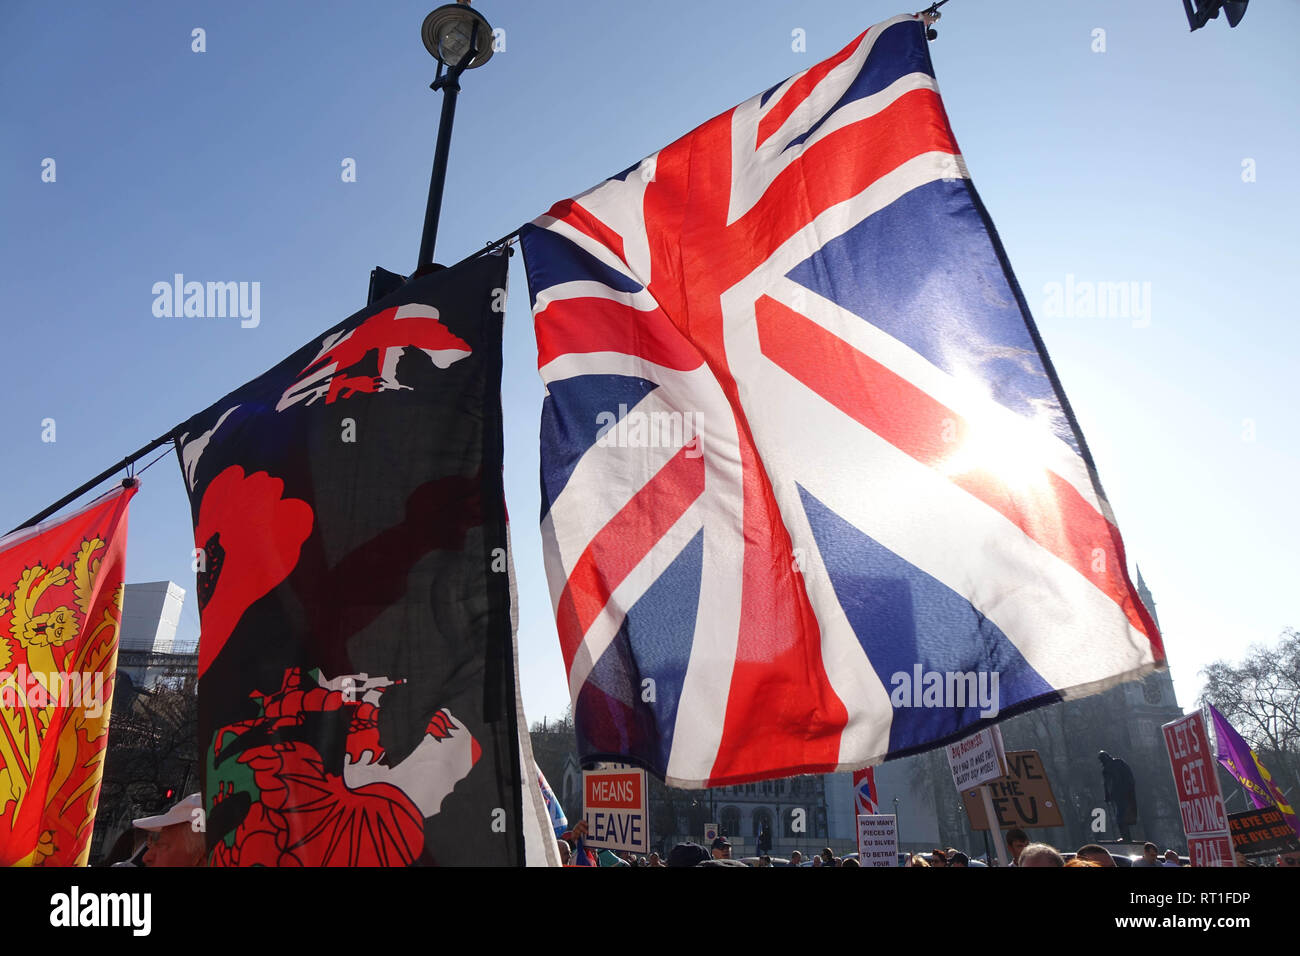 London, UK. 27th Feb, 2019. Pro-Brexit Activists demonstrate in Westminster, London Credit: Thomas Krych/Alamy Live News Stock Photo